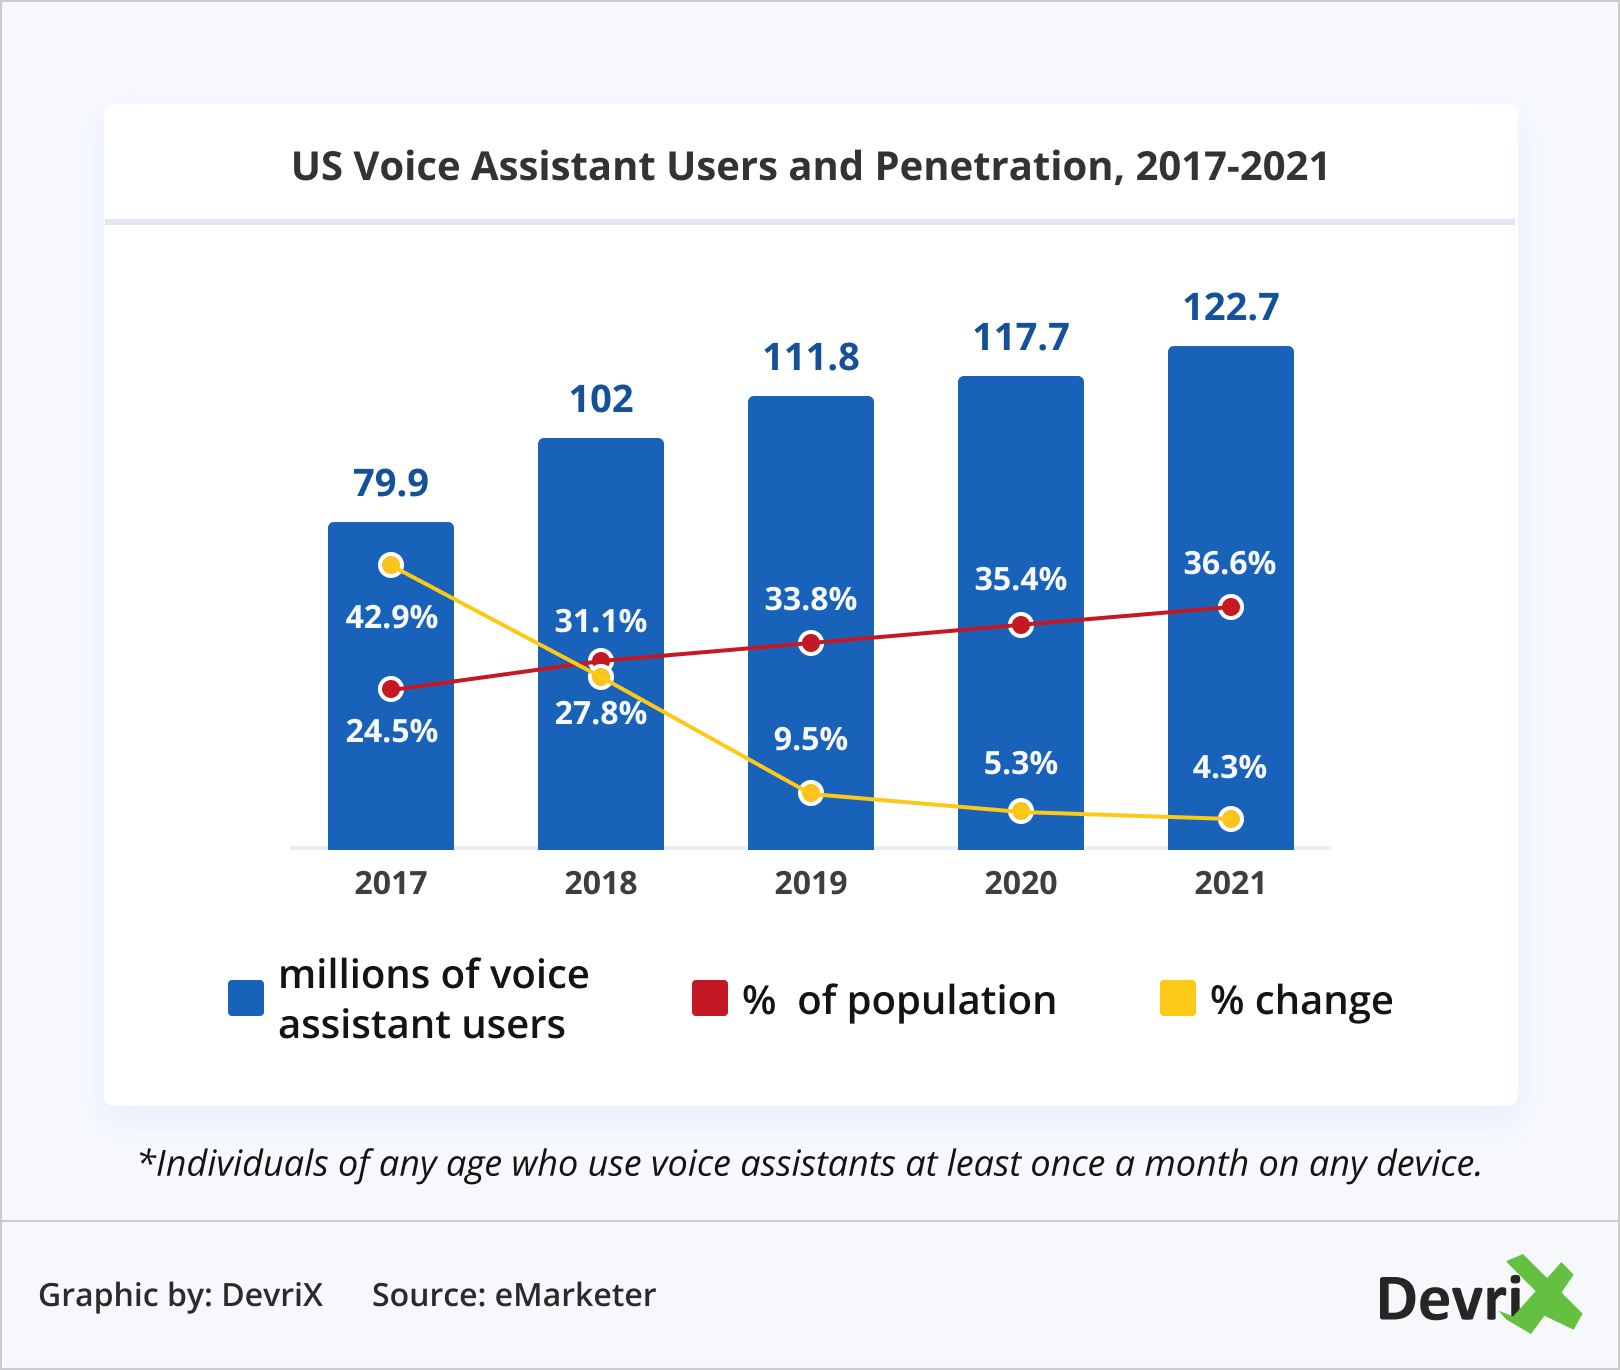 US Voice Assistant Users and Penetration, 2017-2021